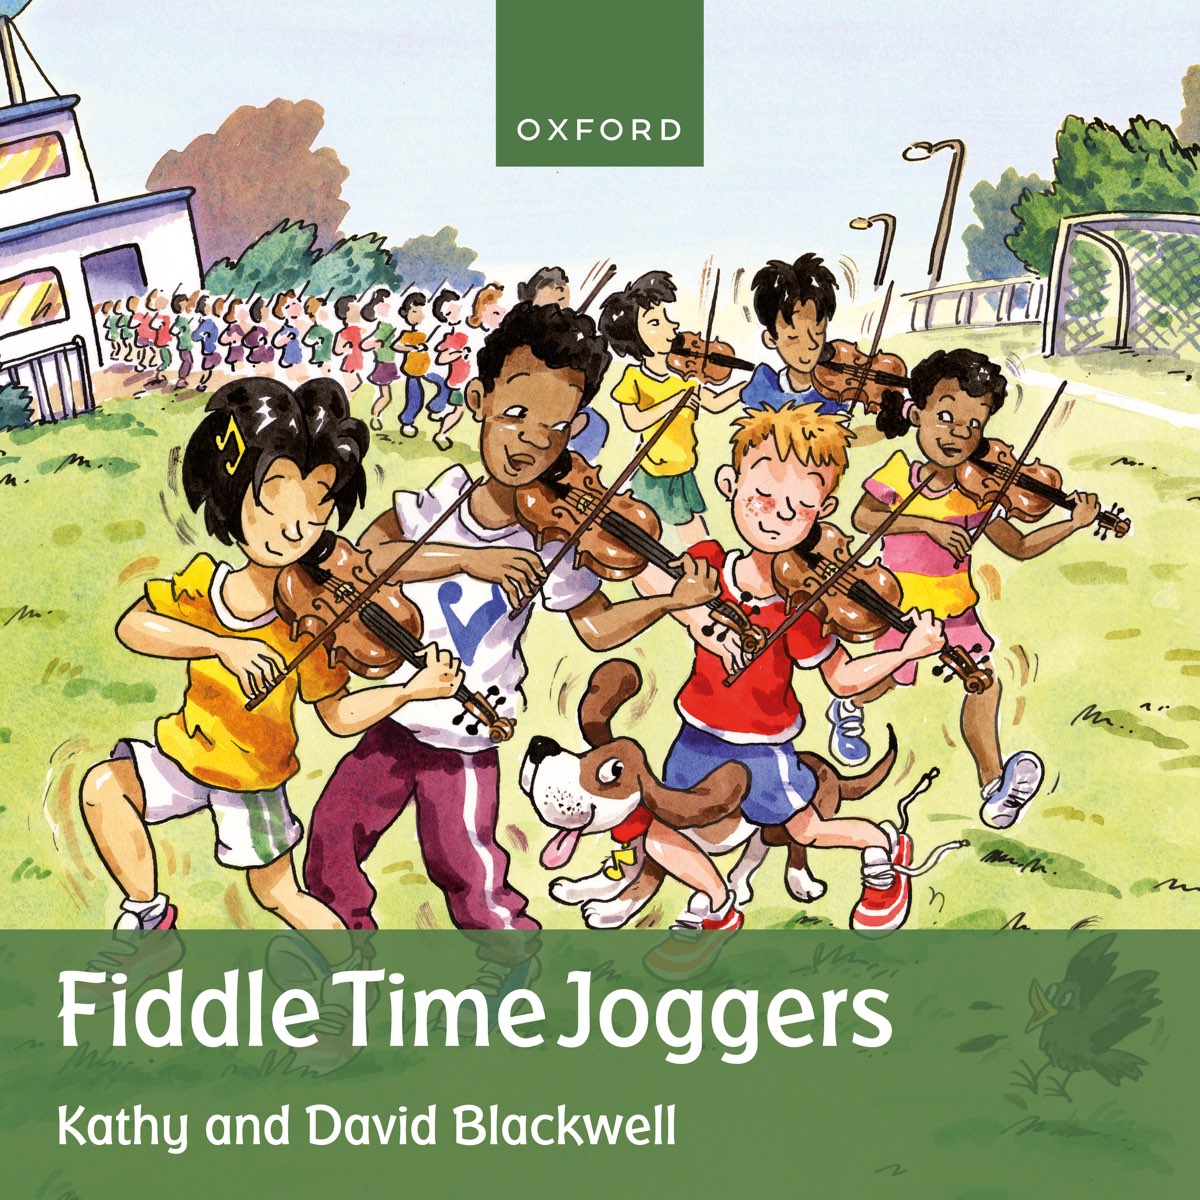 Fiddle Time Joggers by Kathy & David Blackwell & Oxford University Press  Music on Apple Music